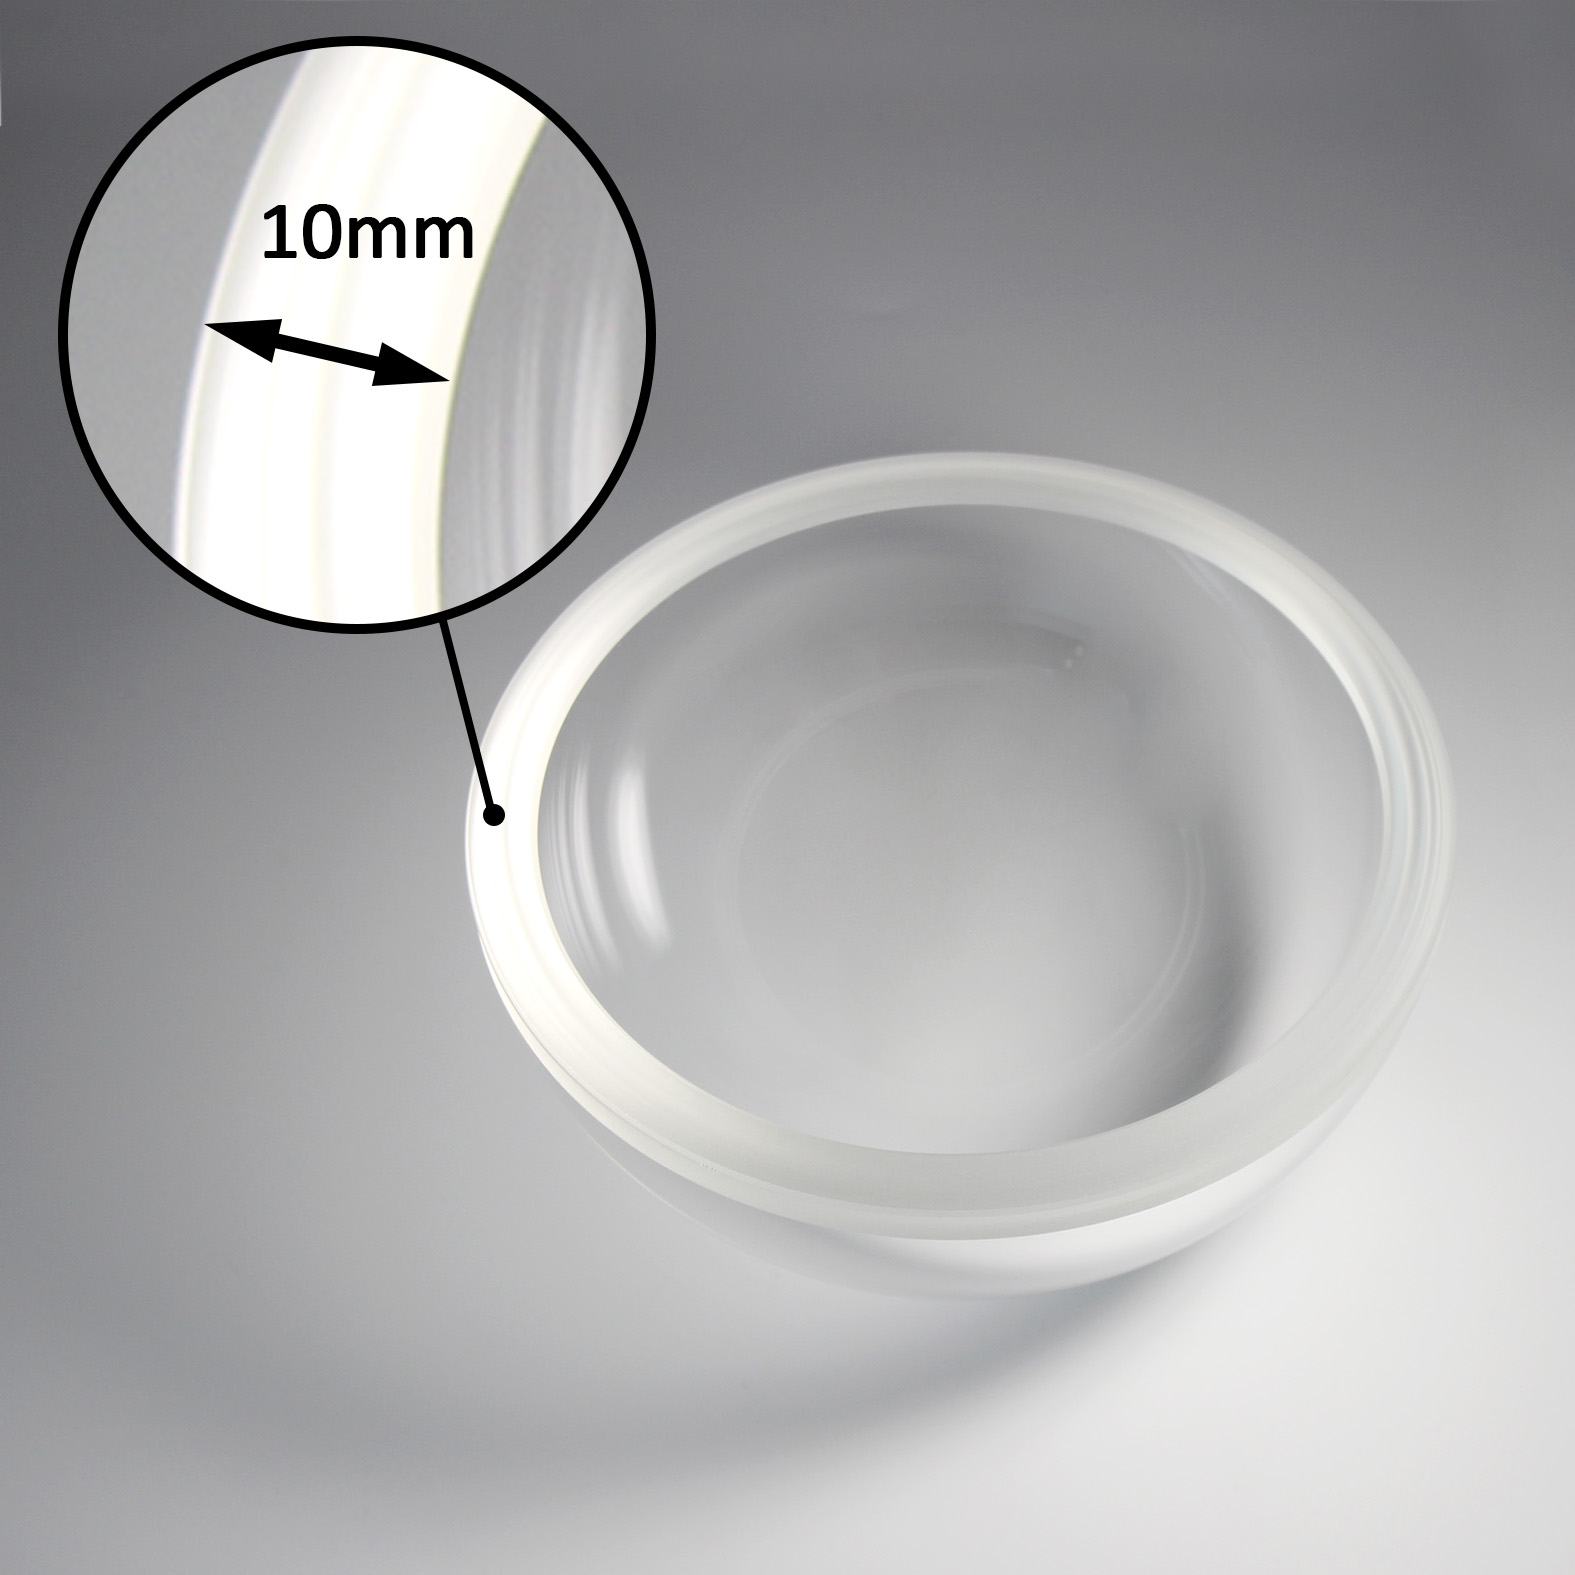 Optical Spherical Dome Lens Glass K9 Bk7 Round Dome Cover